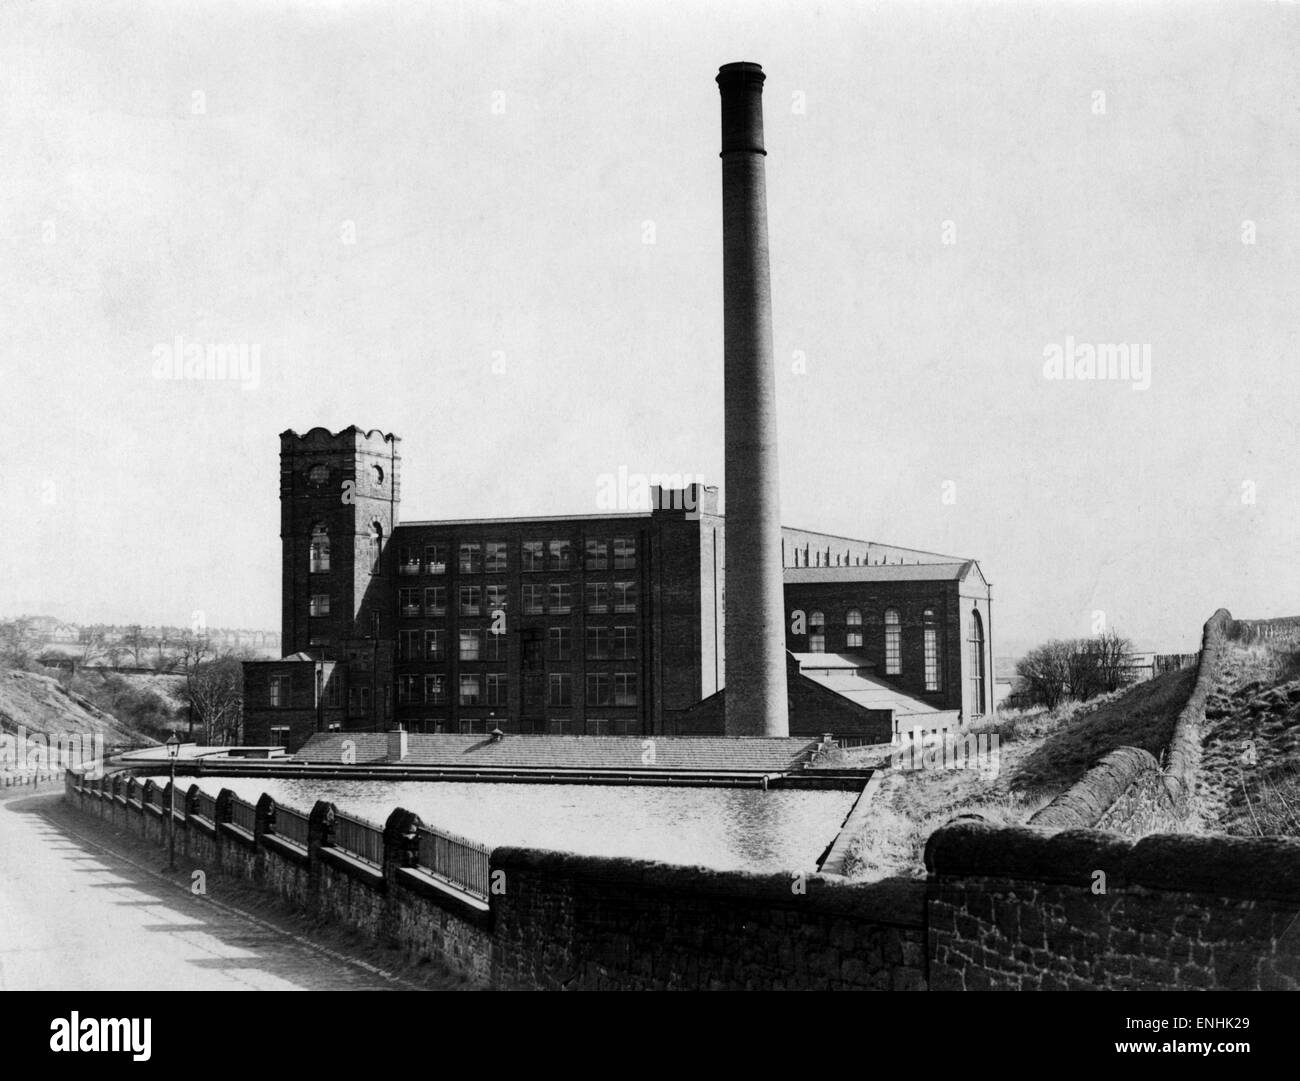 North End Spinning Company's Mill in Bolton, Greater Manchester, 16th March 1948. Stock Photo